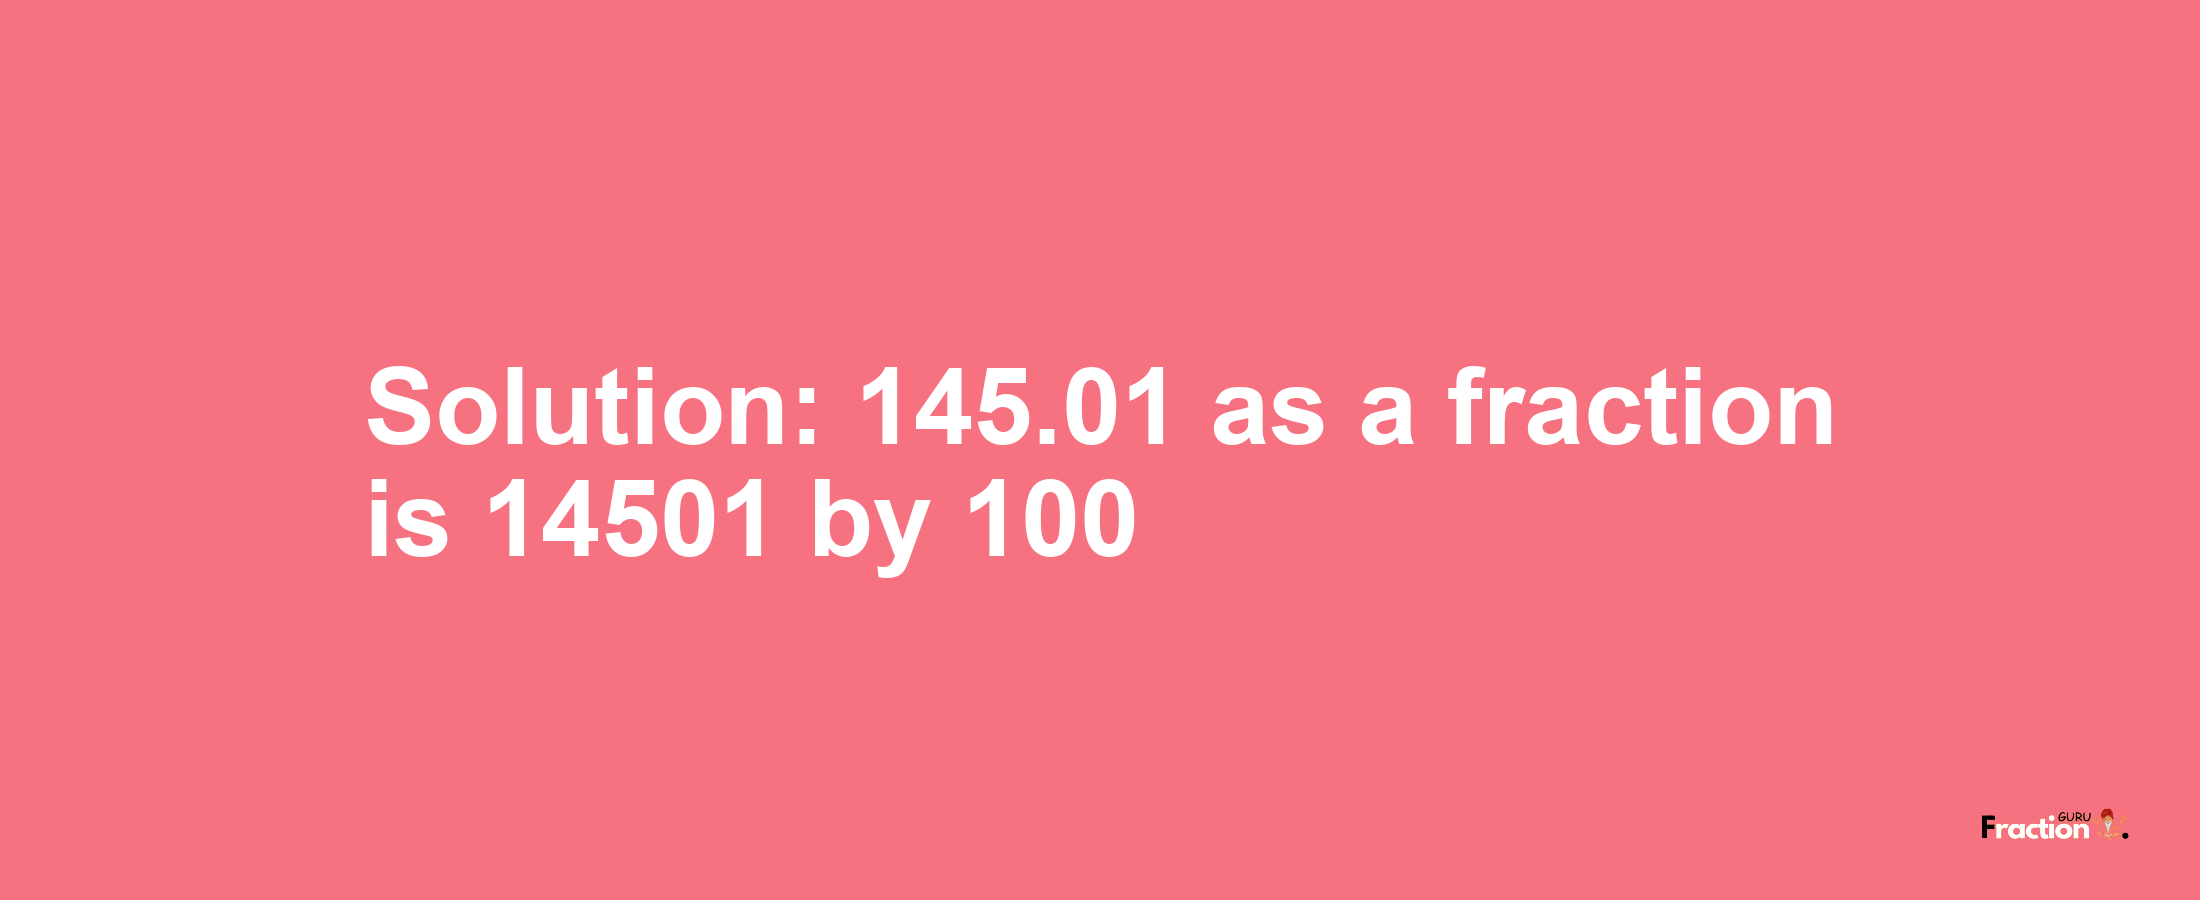 Solution:145.01 as a fraction is 14501/100